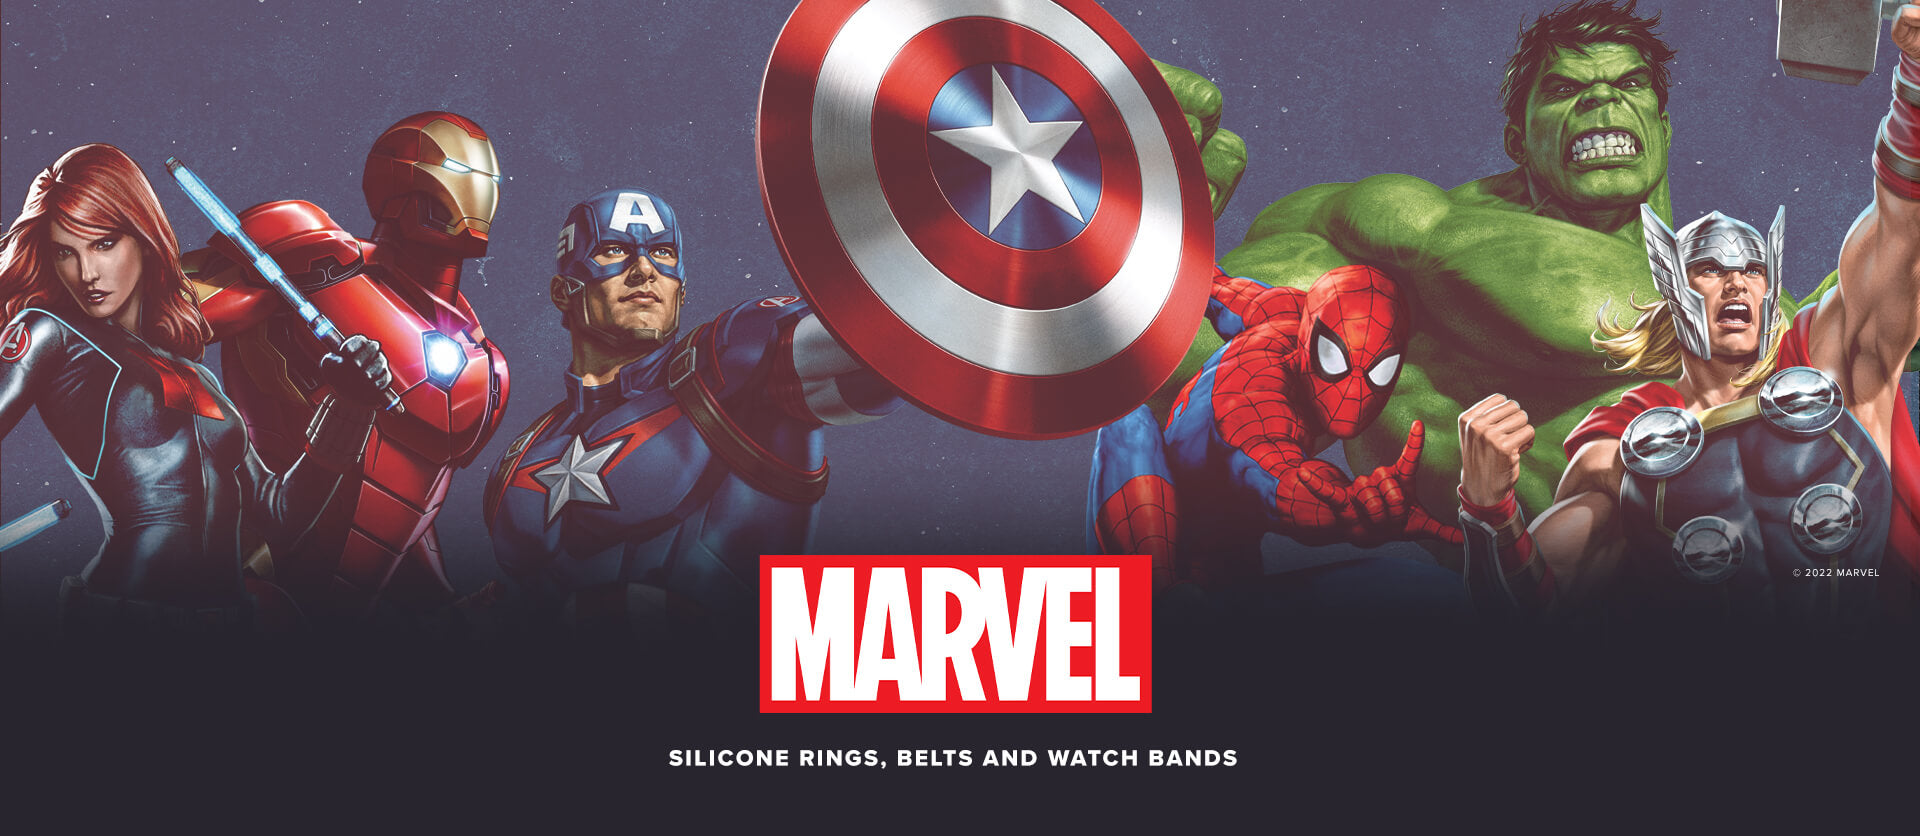 Marvel Silicone Rings, Belts and Watch Bands